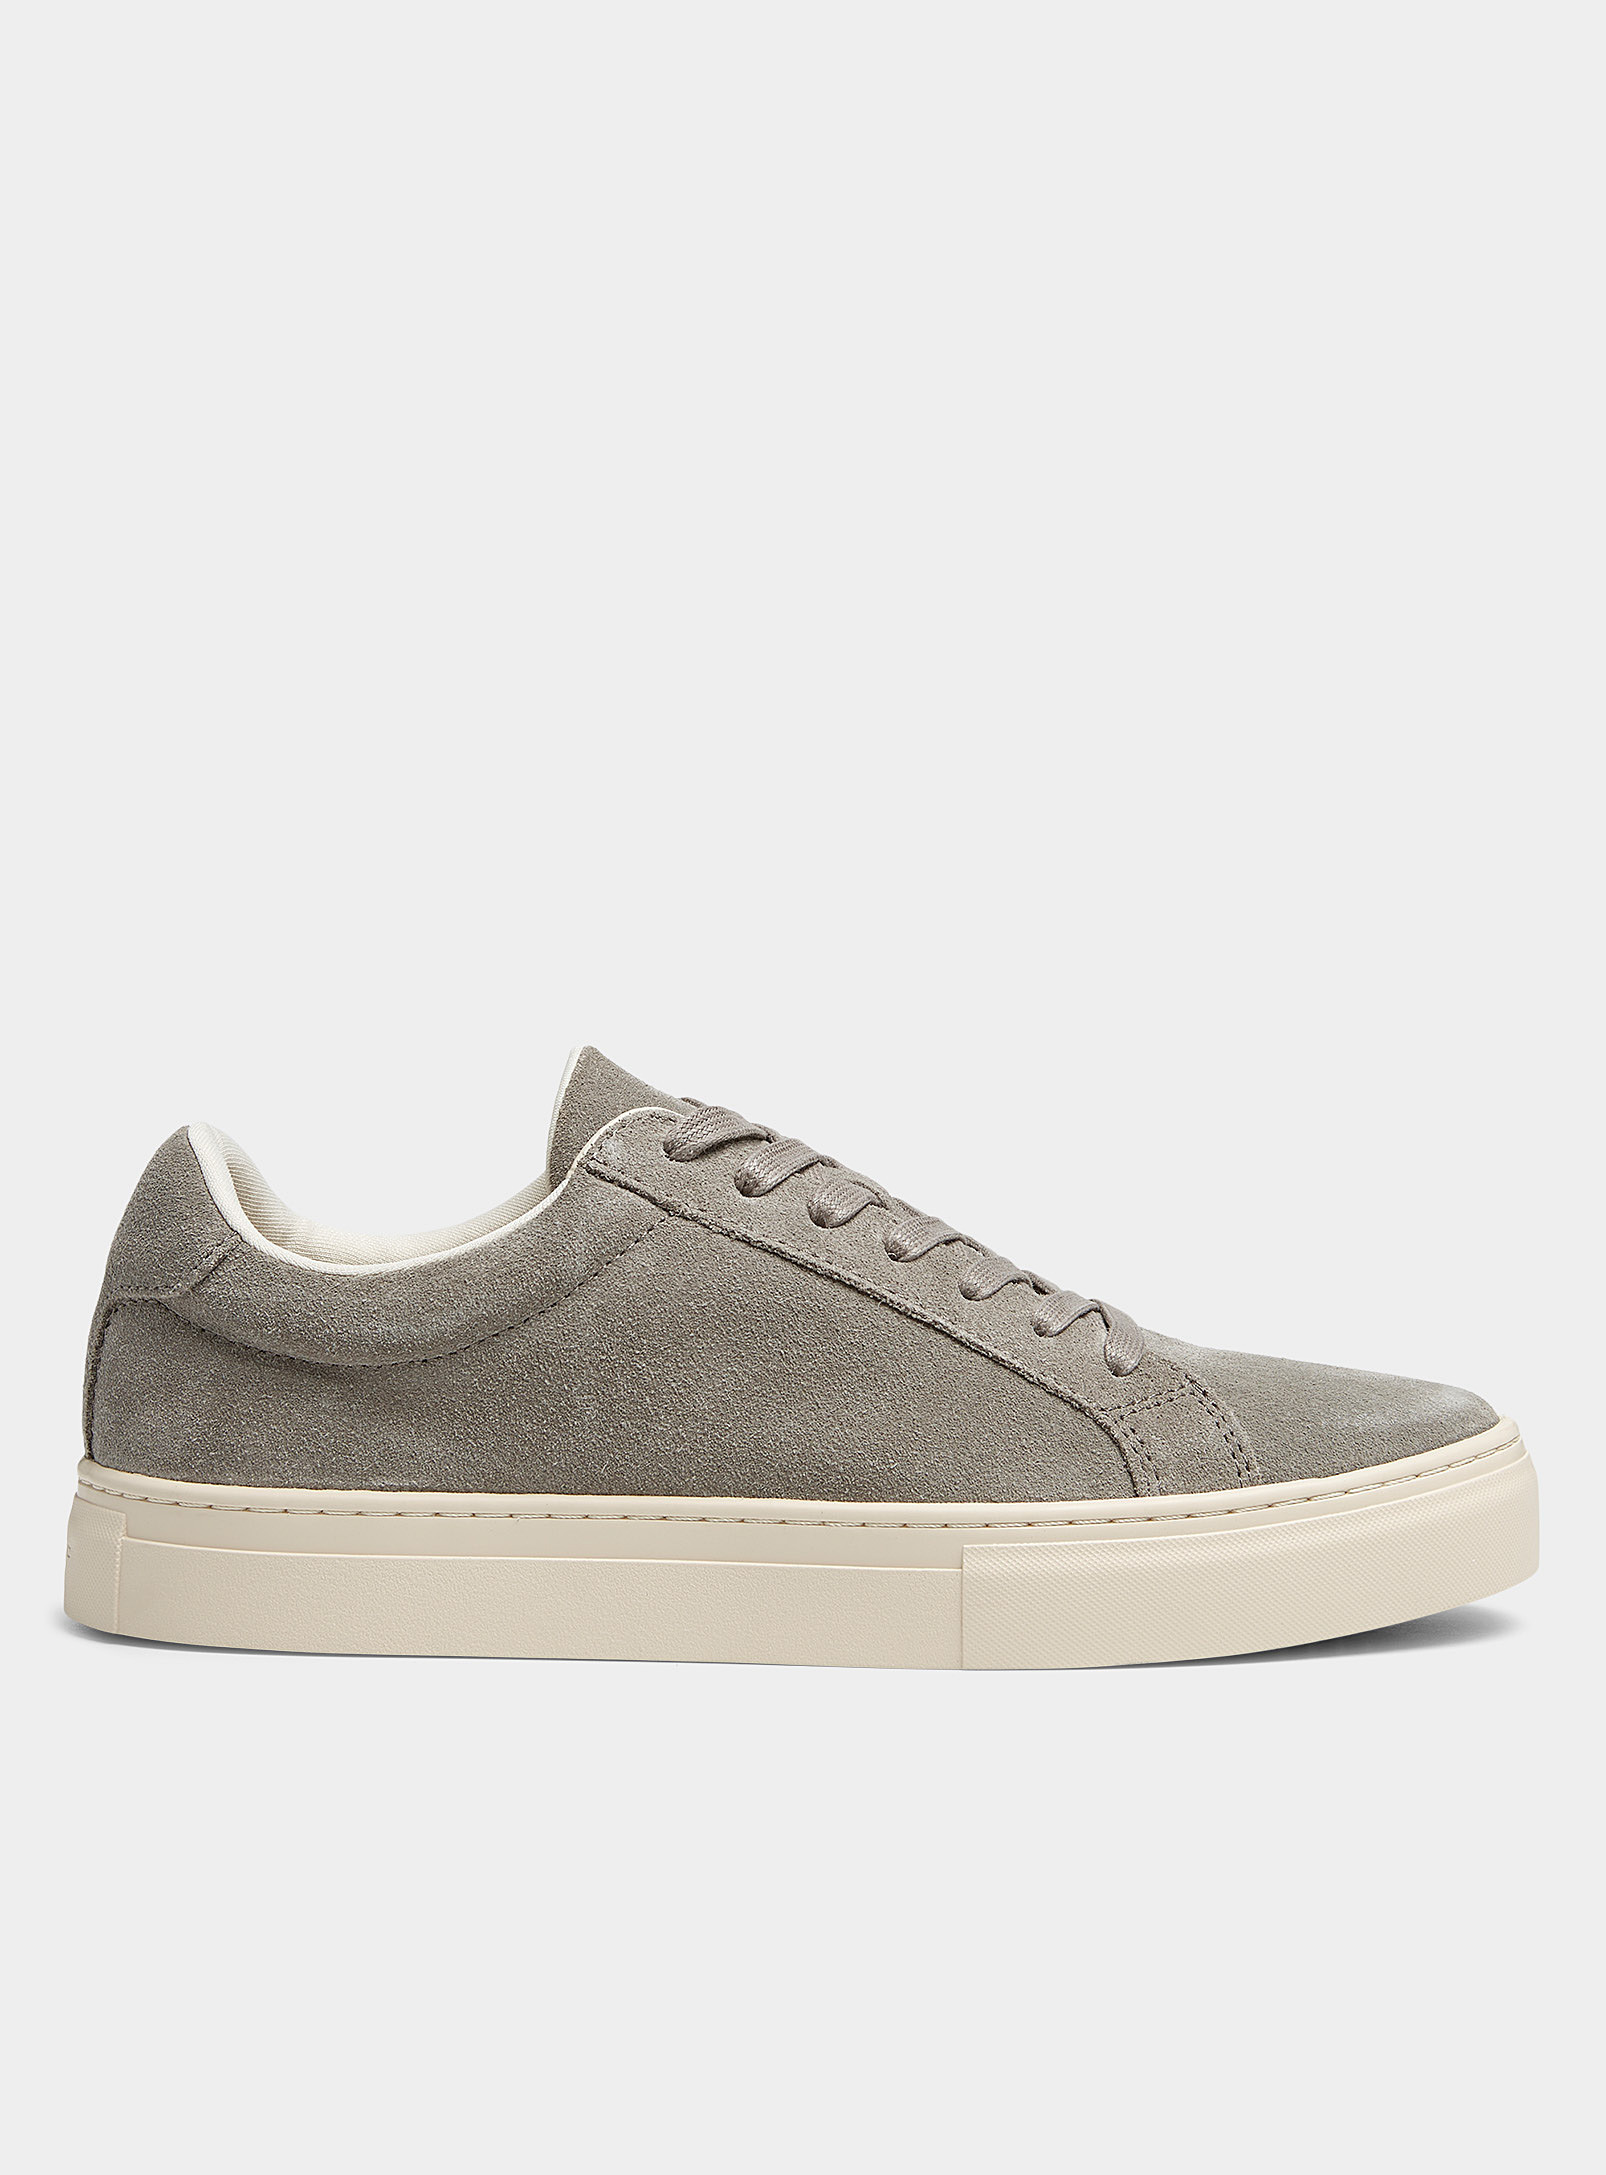 Vagabond Shoemakers Paul 2.0 Suede Sneakers Men In Ivory White